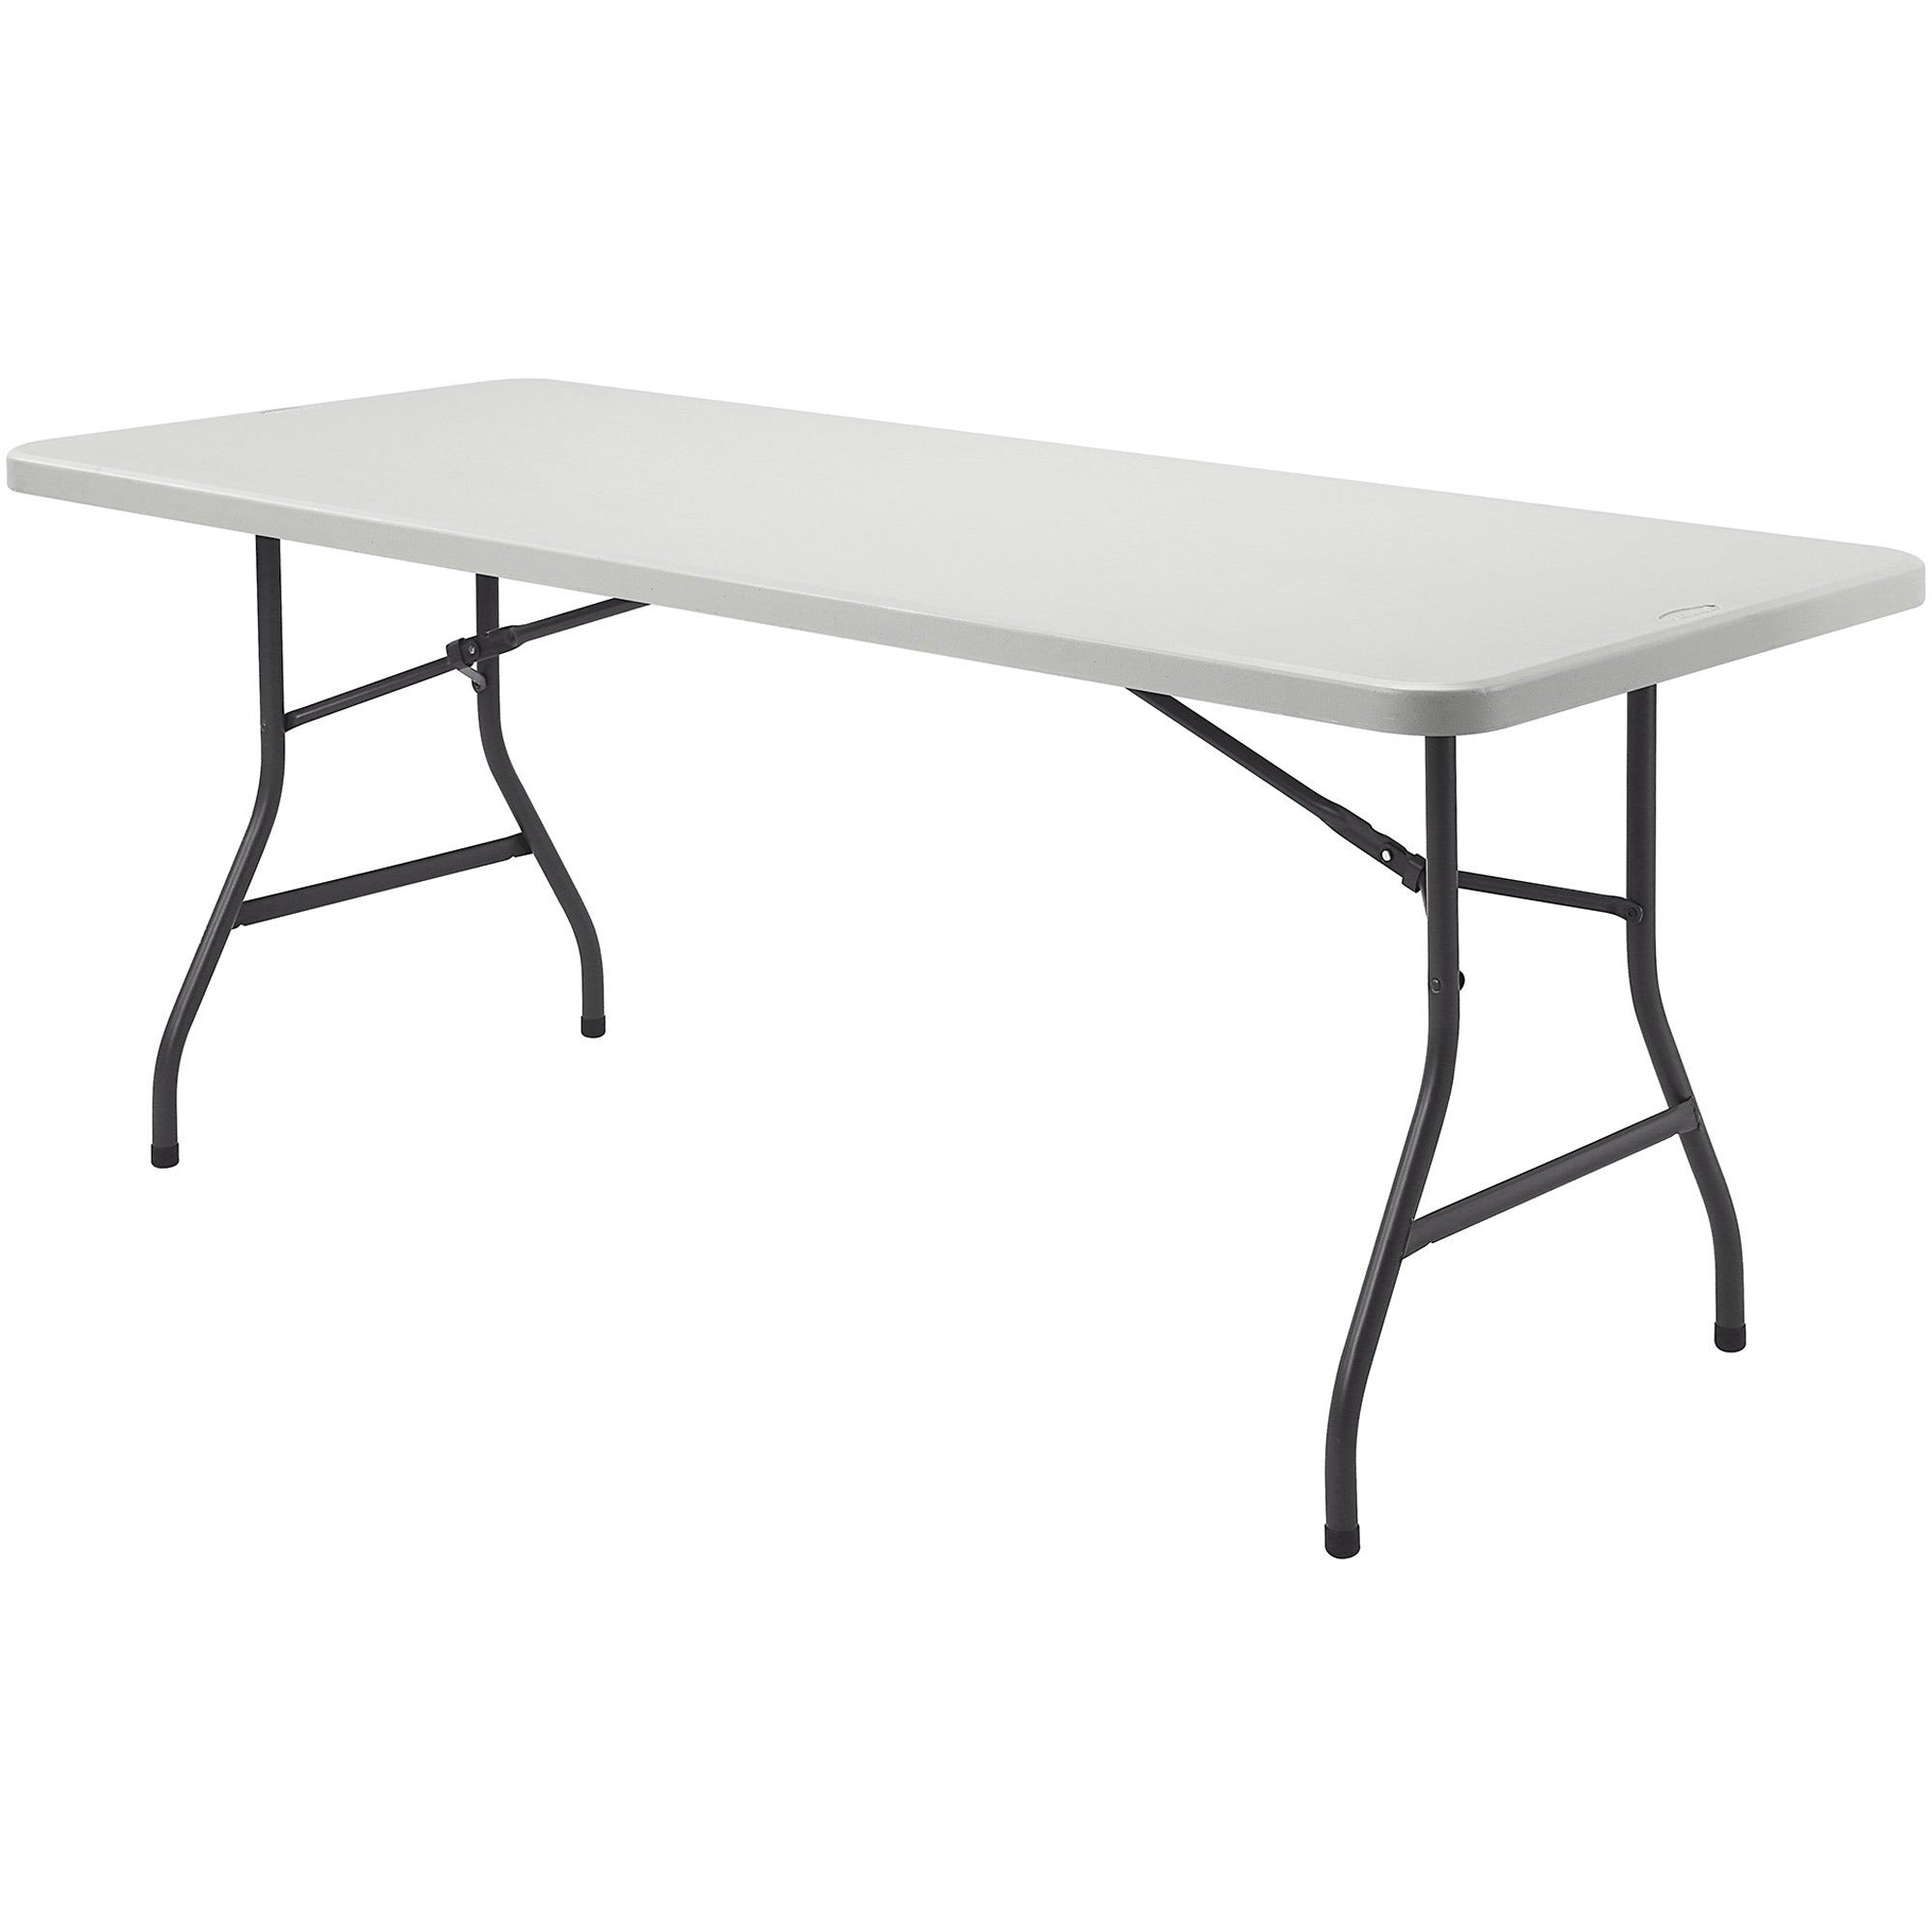 lorell-ultra-lite-banquet-table-for-table-toplight-gray-rectangle-top-dark-gray-base-600-lb-capacity-x-96-table-top-width-x-30-table-top-depth-x-2-table-top-thickness-29-height-gray-1-each_llr66654 - 1